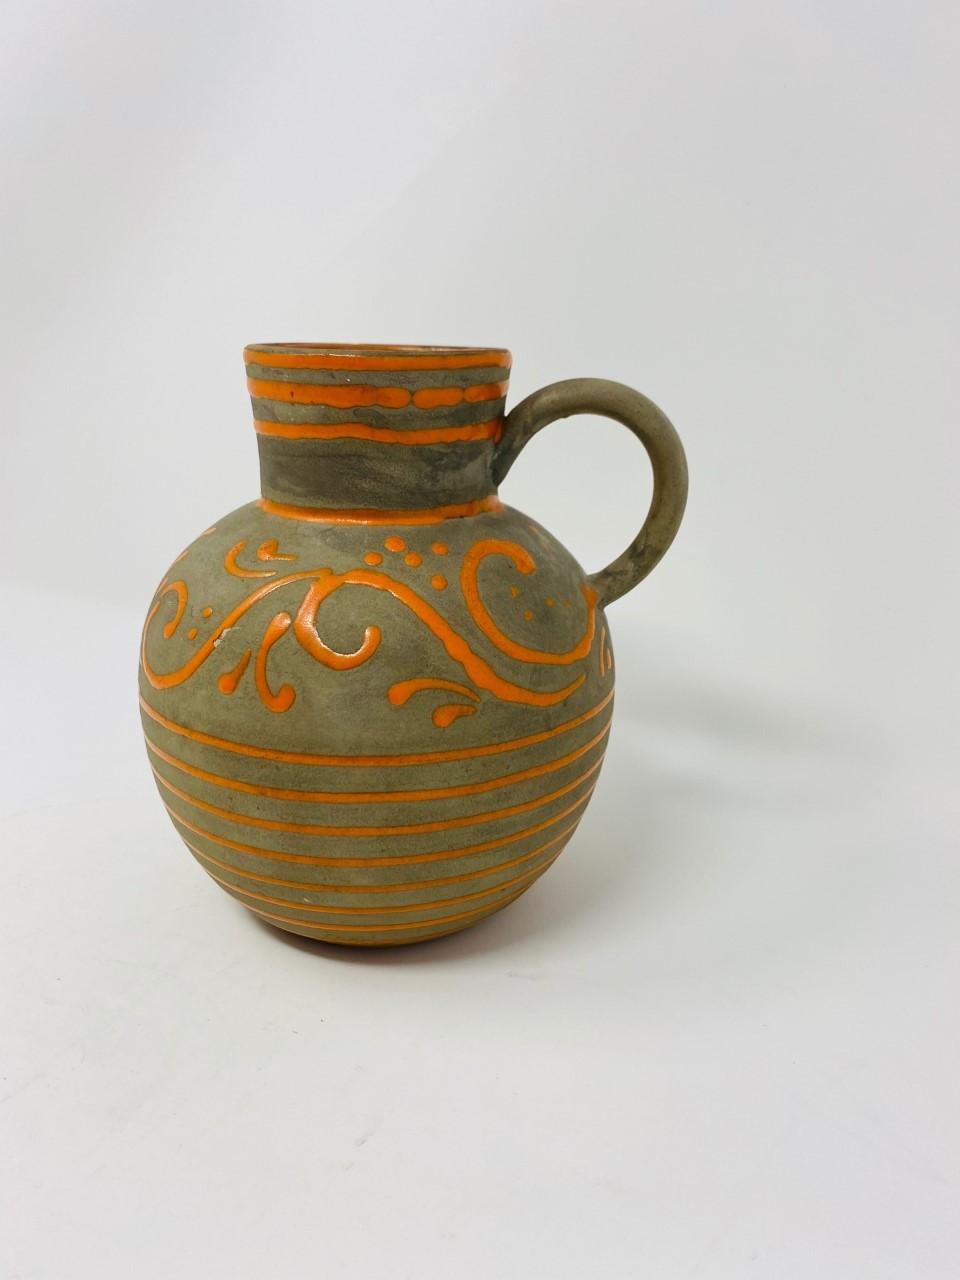 Rare pottery jar or vase by Nittsjö Keramik. Beautifully crafted, this vintage piece brings style and joy to the eye. Hand decorated and glazed in a dark taupe grey with horizontal orange strips and a decorative motif of ondulating lines. Signed